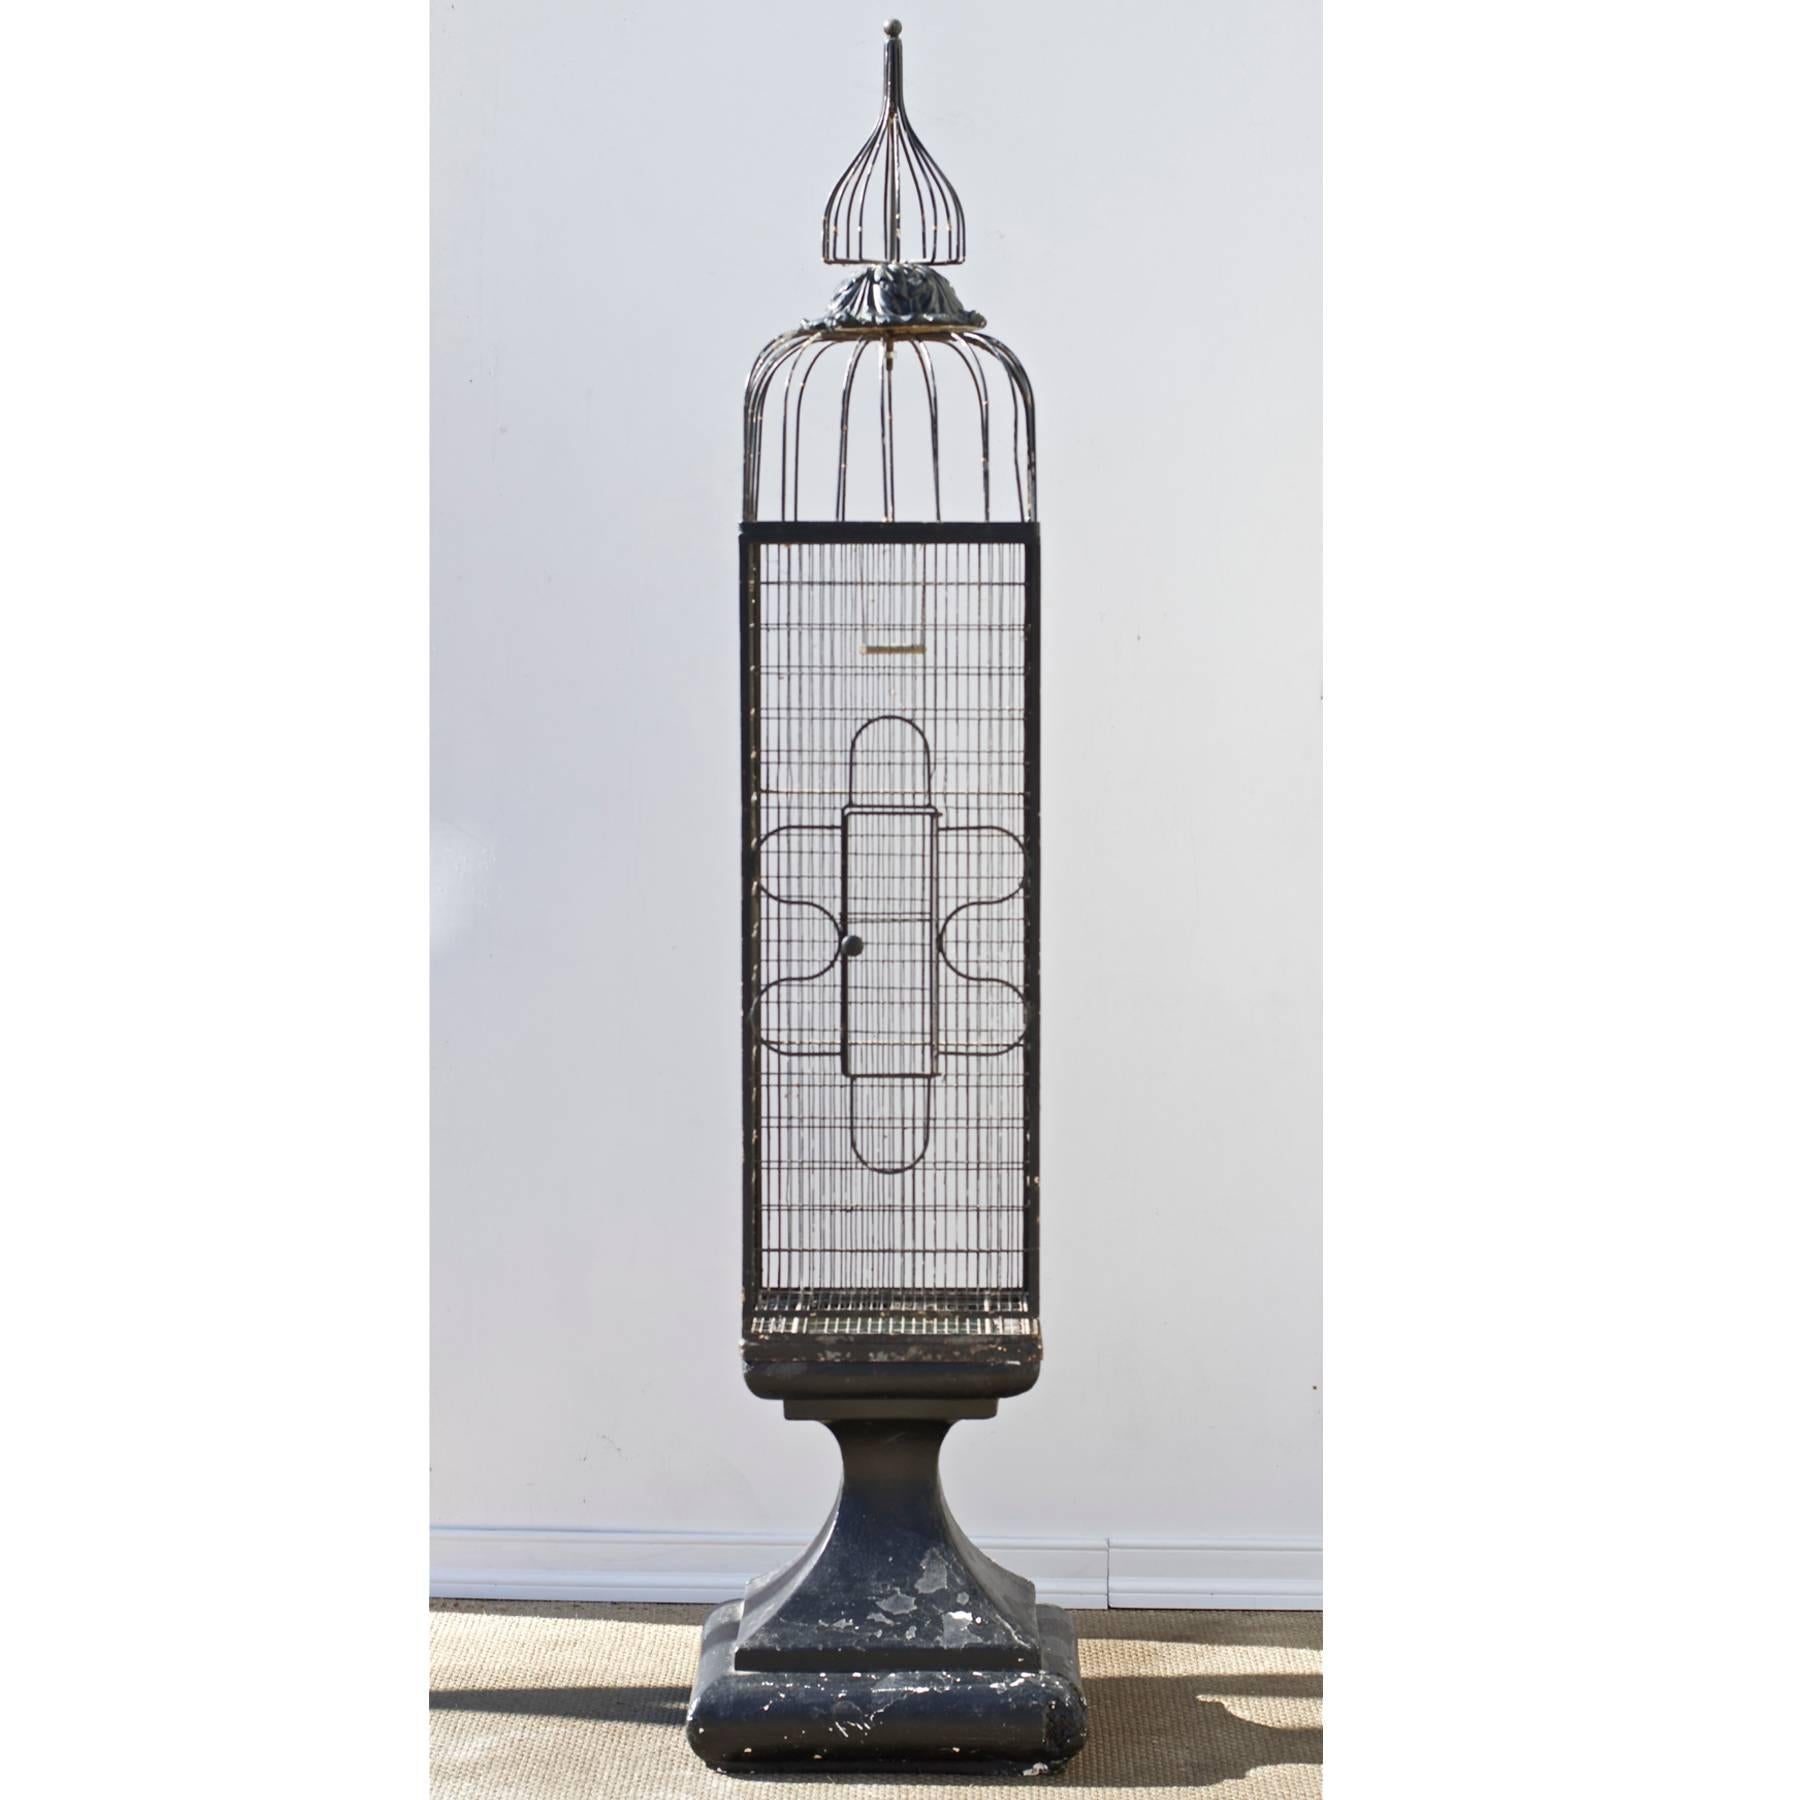 A tall and architectural metal birdcage on fiber cast stand. The look is highly decorative with a rustic edge. The design of the birdhouse is distinctively in the manner of Frederick Weinberg. Equally at home inside or outside any fine home. 